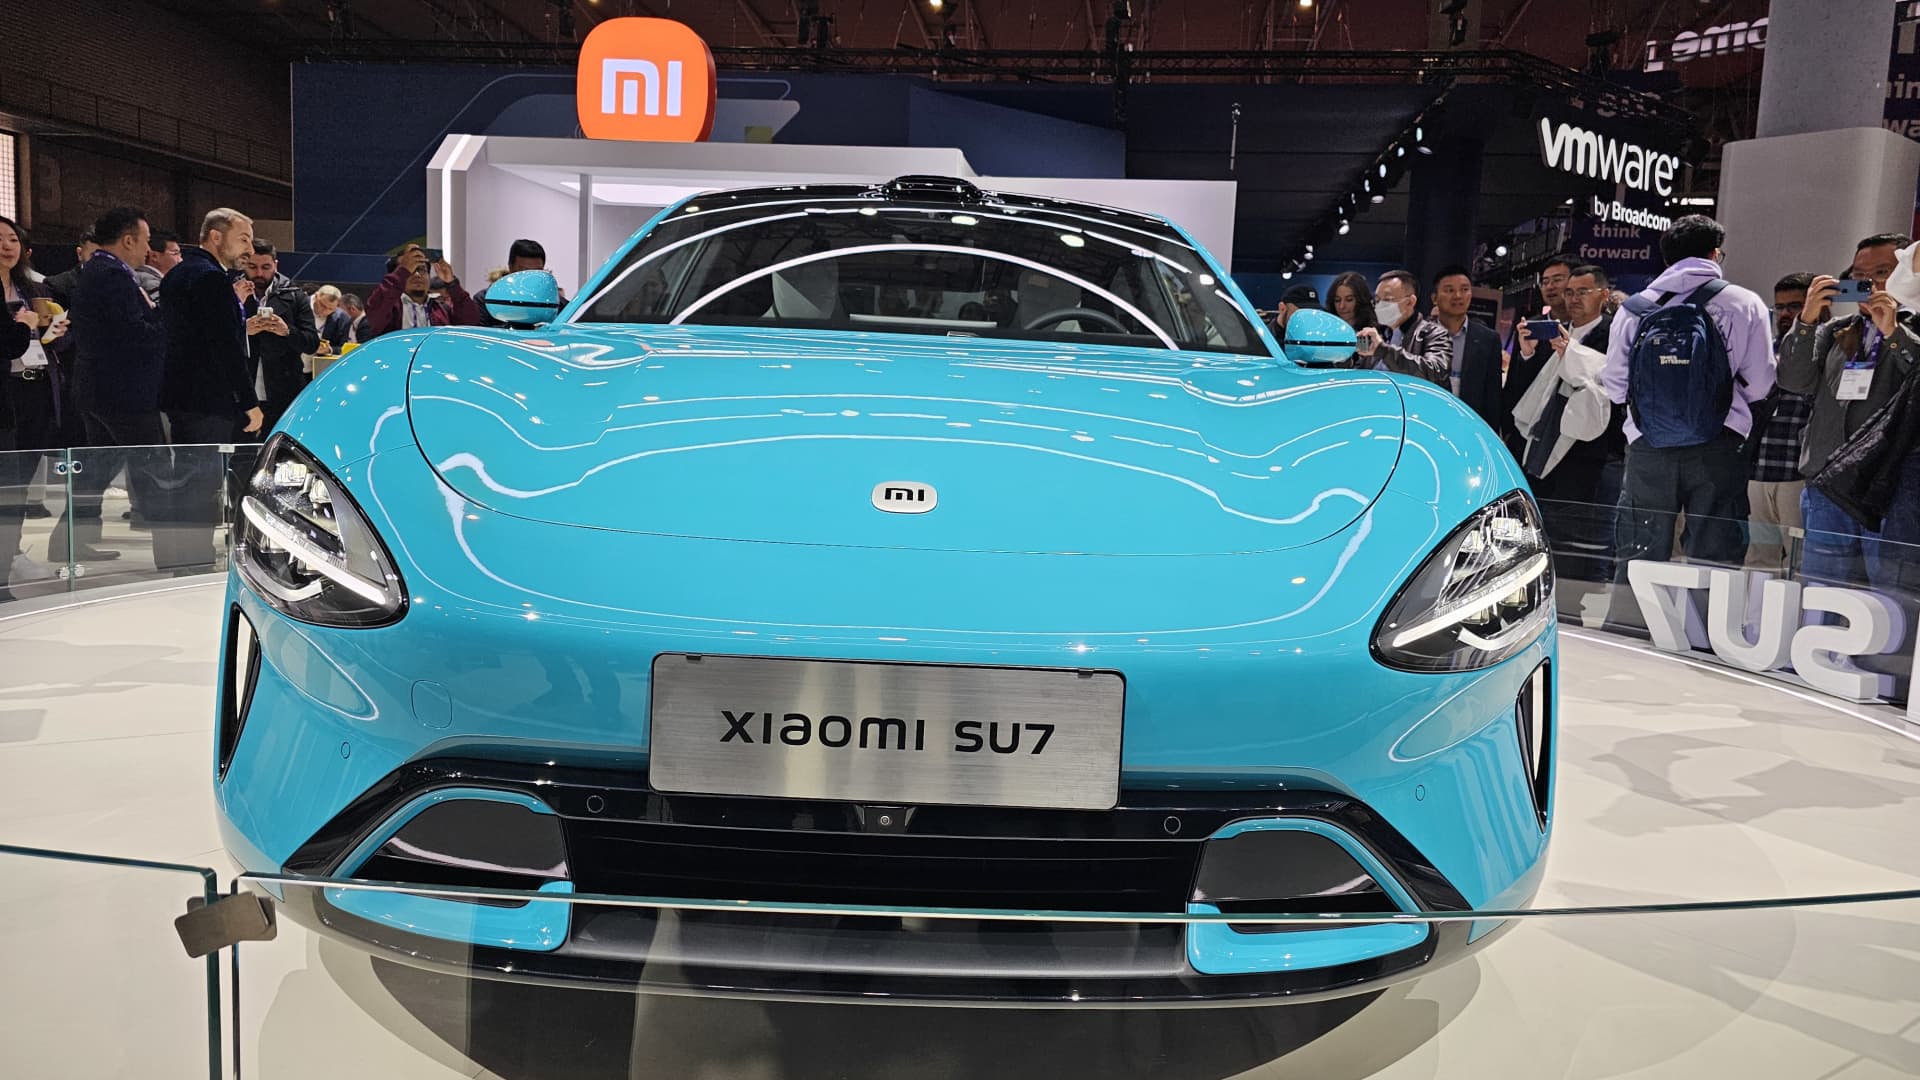 China's Xiaomi is selling more EVs than expected, raising hopes it can break even sooner